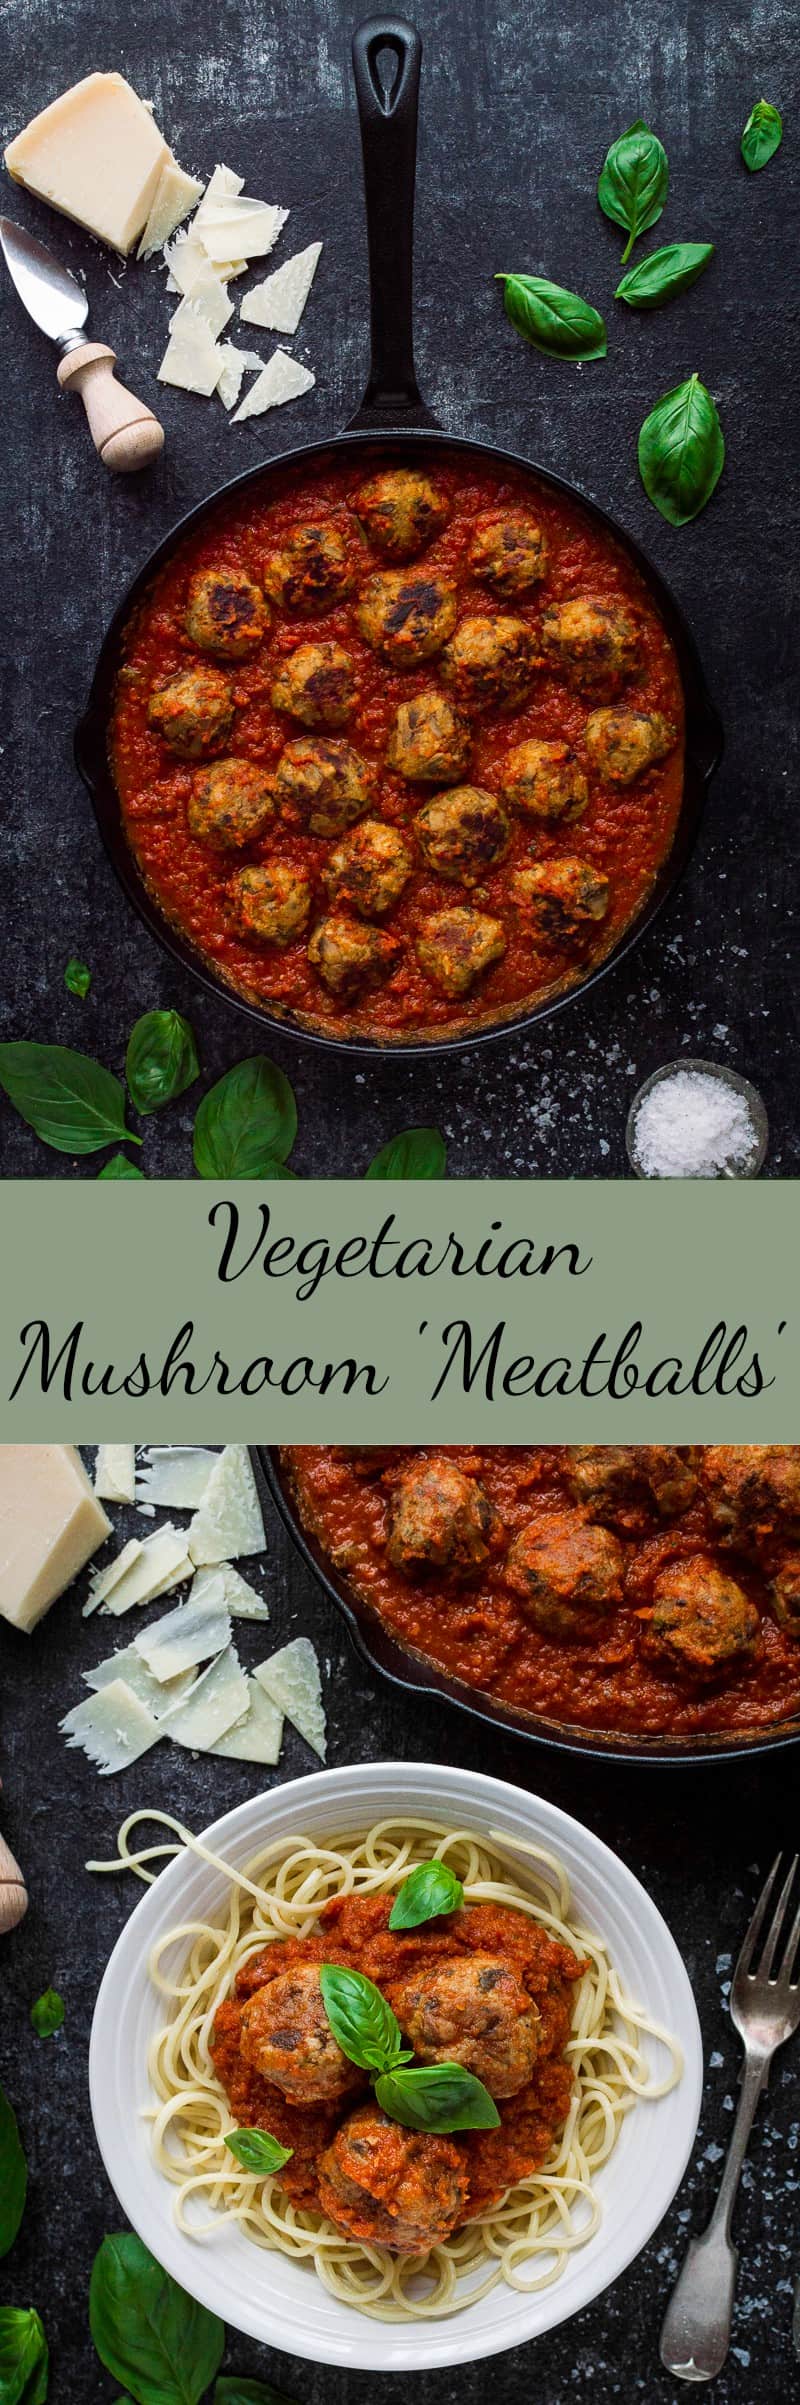 Vegetarian mushroom meatballs - these moist, herby, delicious meatless 'meatballs' taste amazing with tomato sauce and pasta - perfect healthy comfort food!